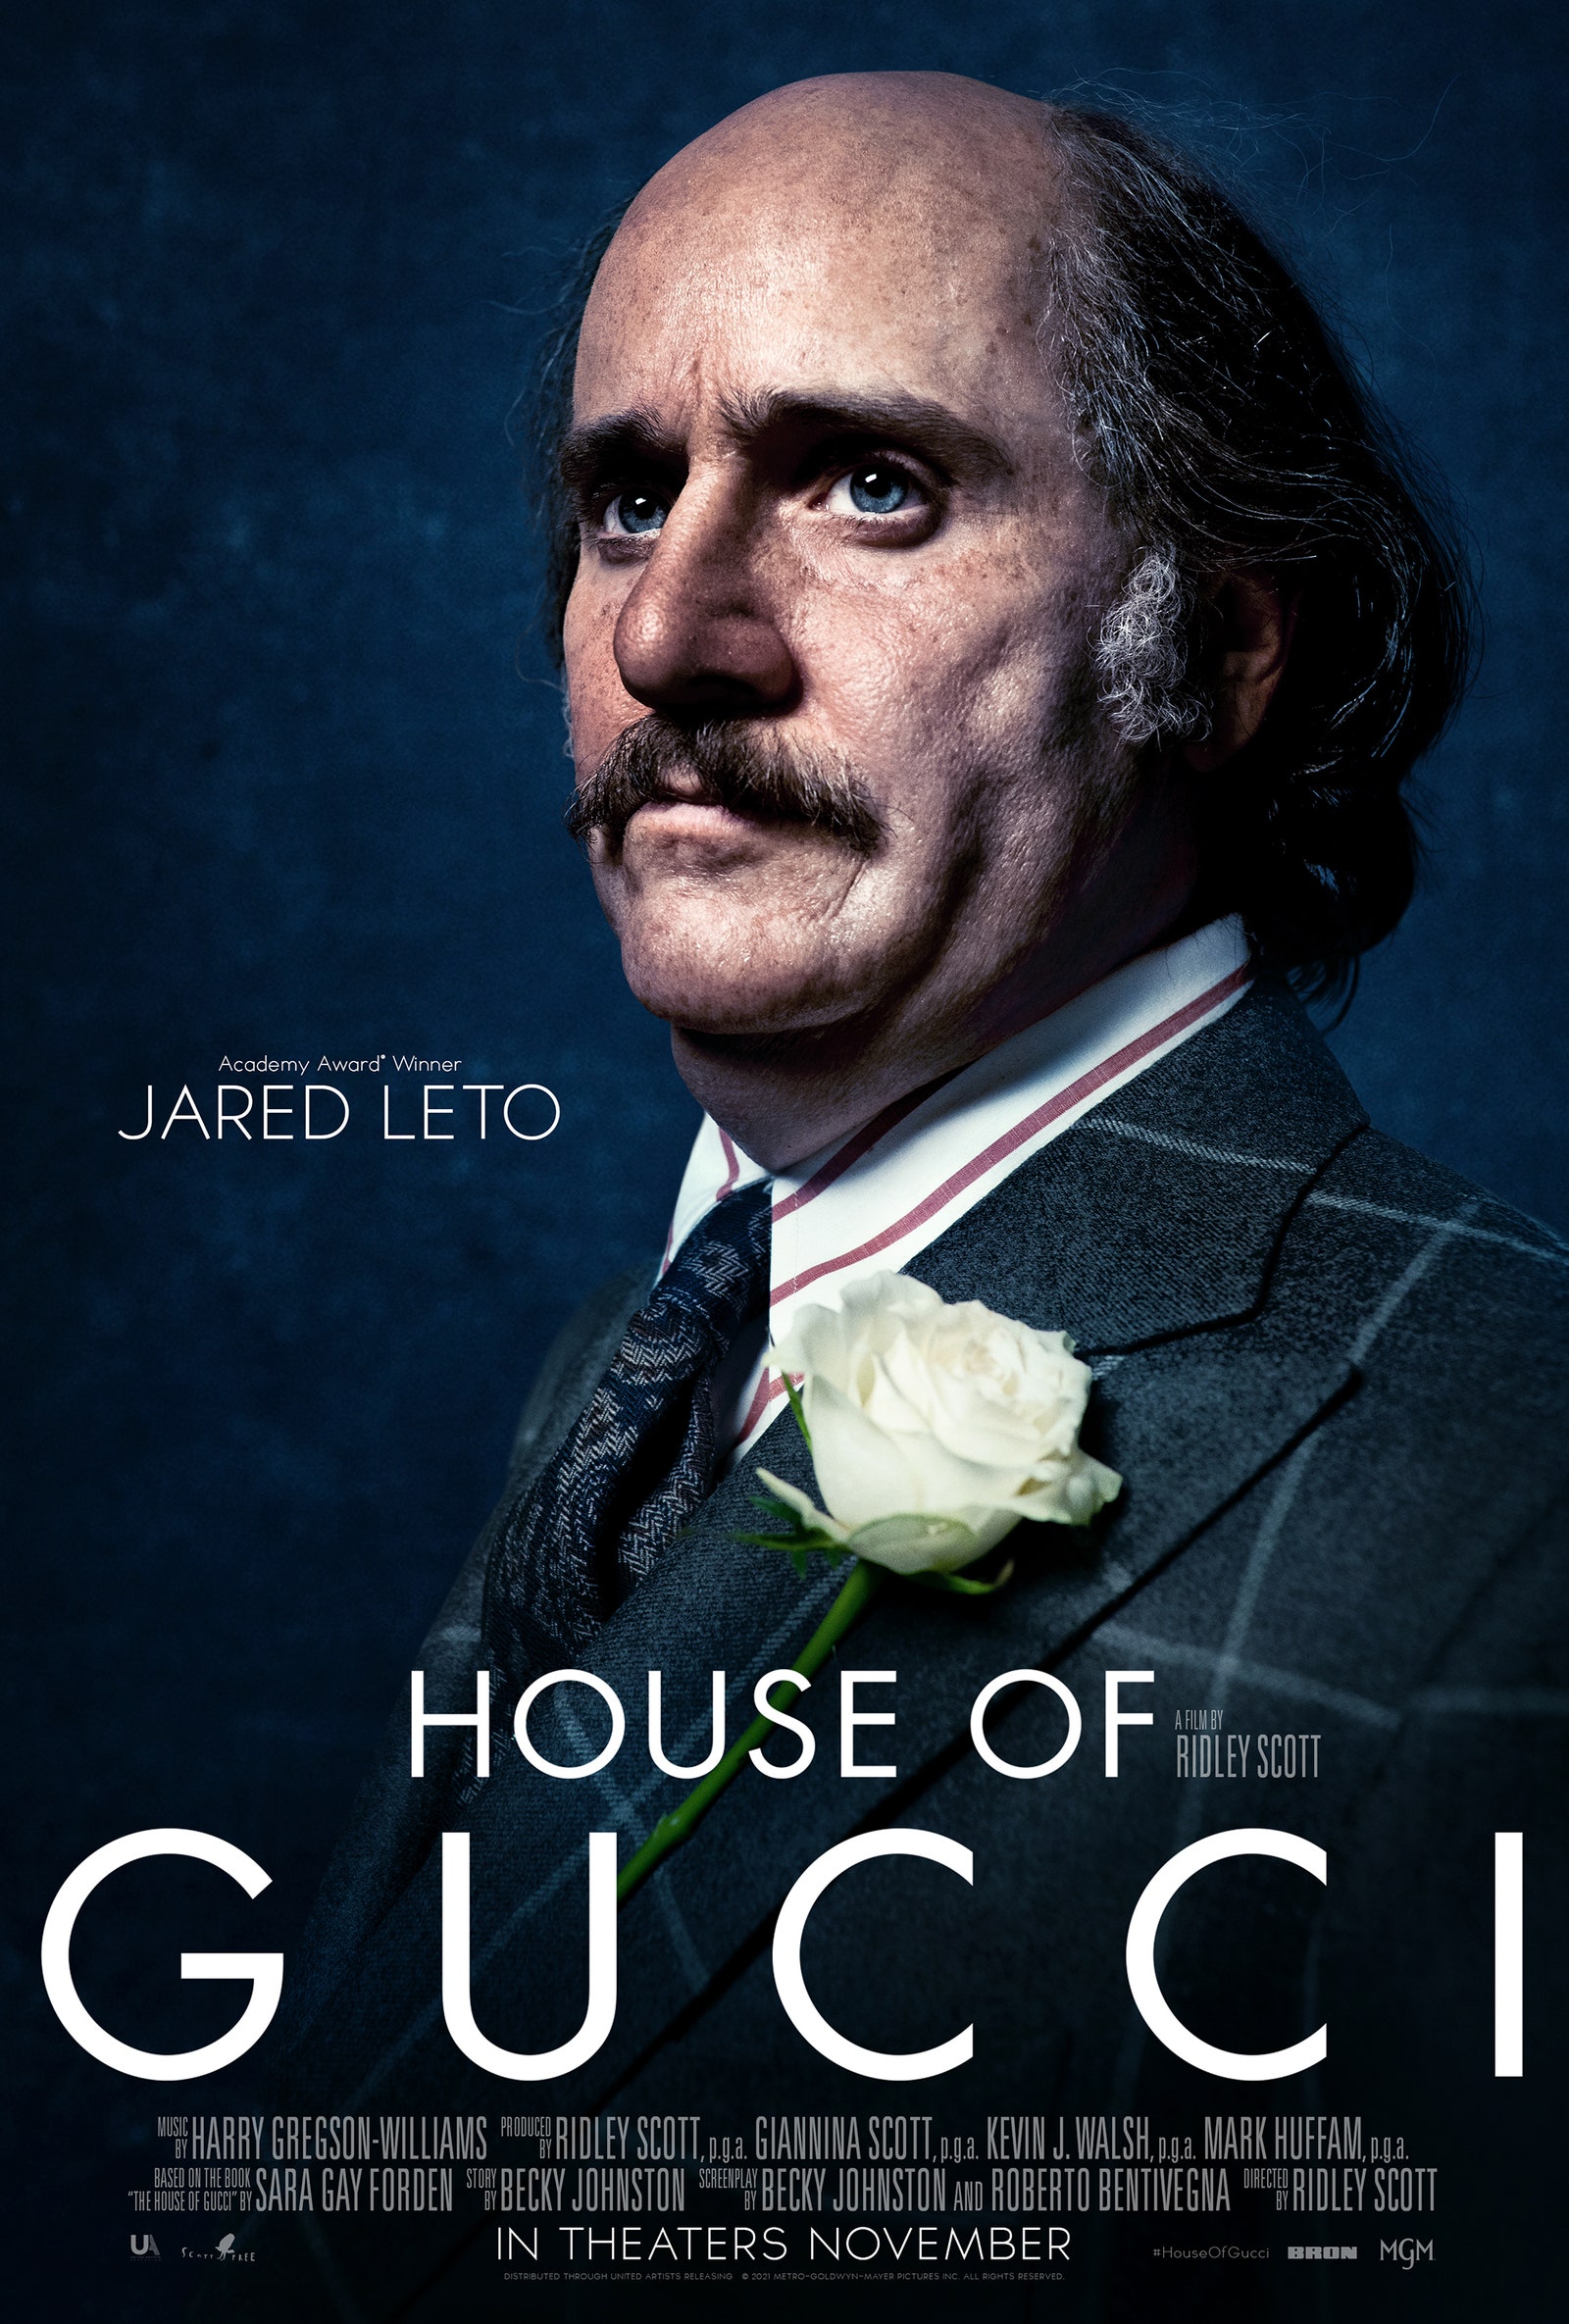 House of Gucci Jared Leto